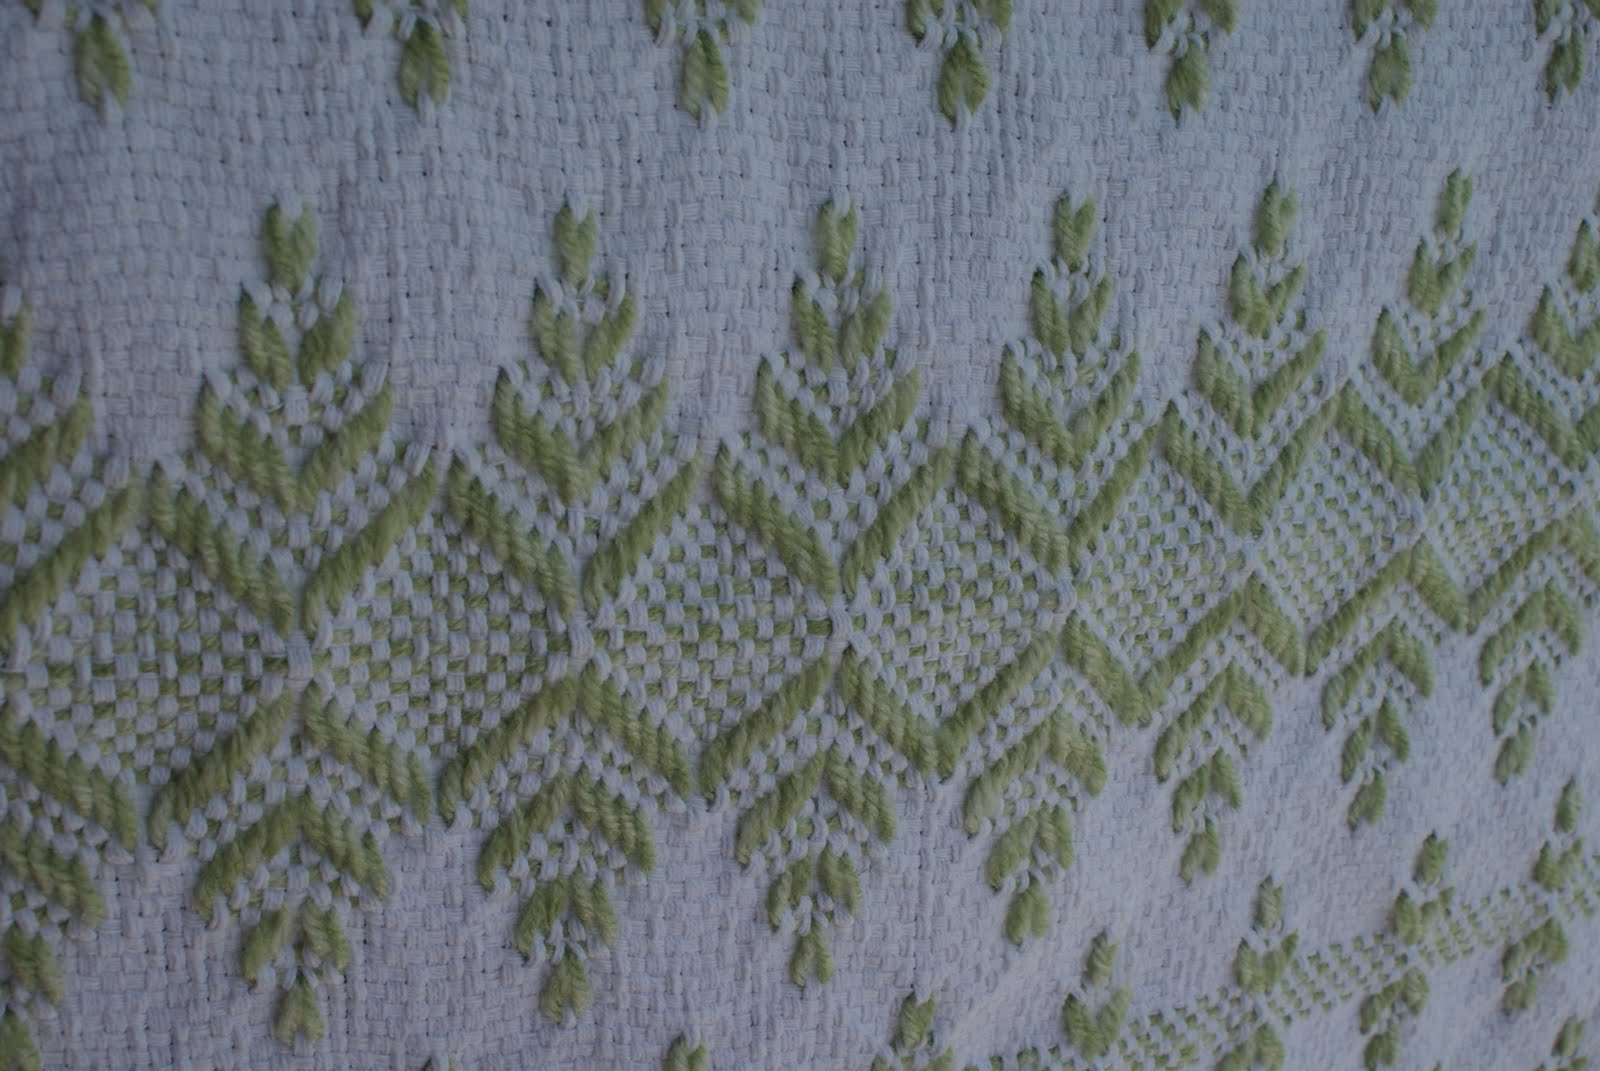 Fun with loop stitches on Monk's cloth!  Swedish weaving, Monks cloth,  Weaving loom projects